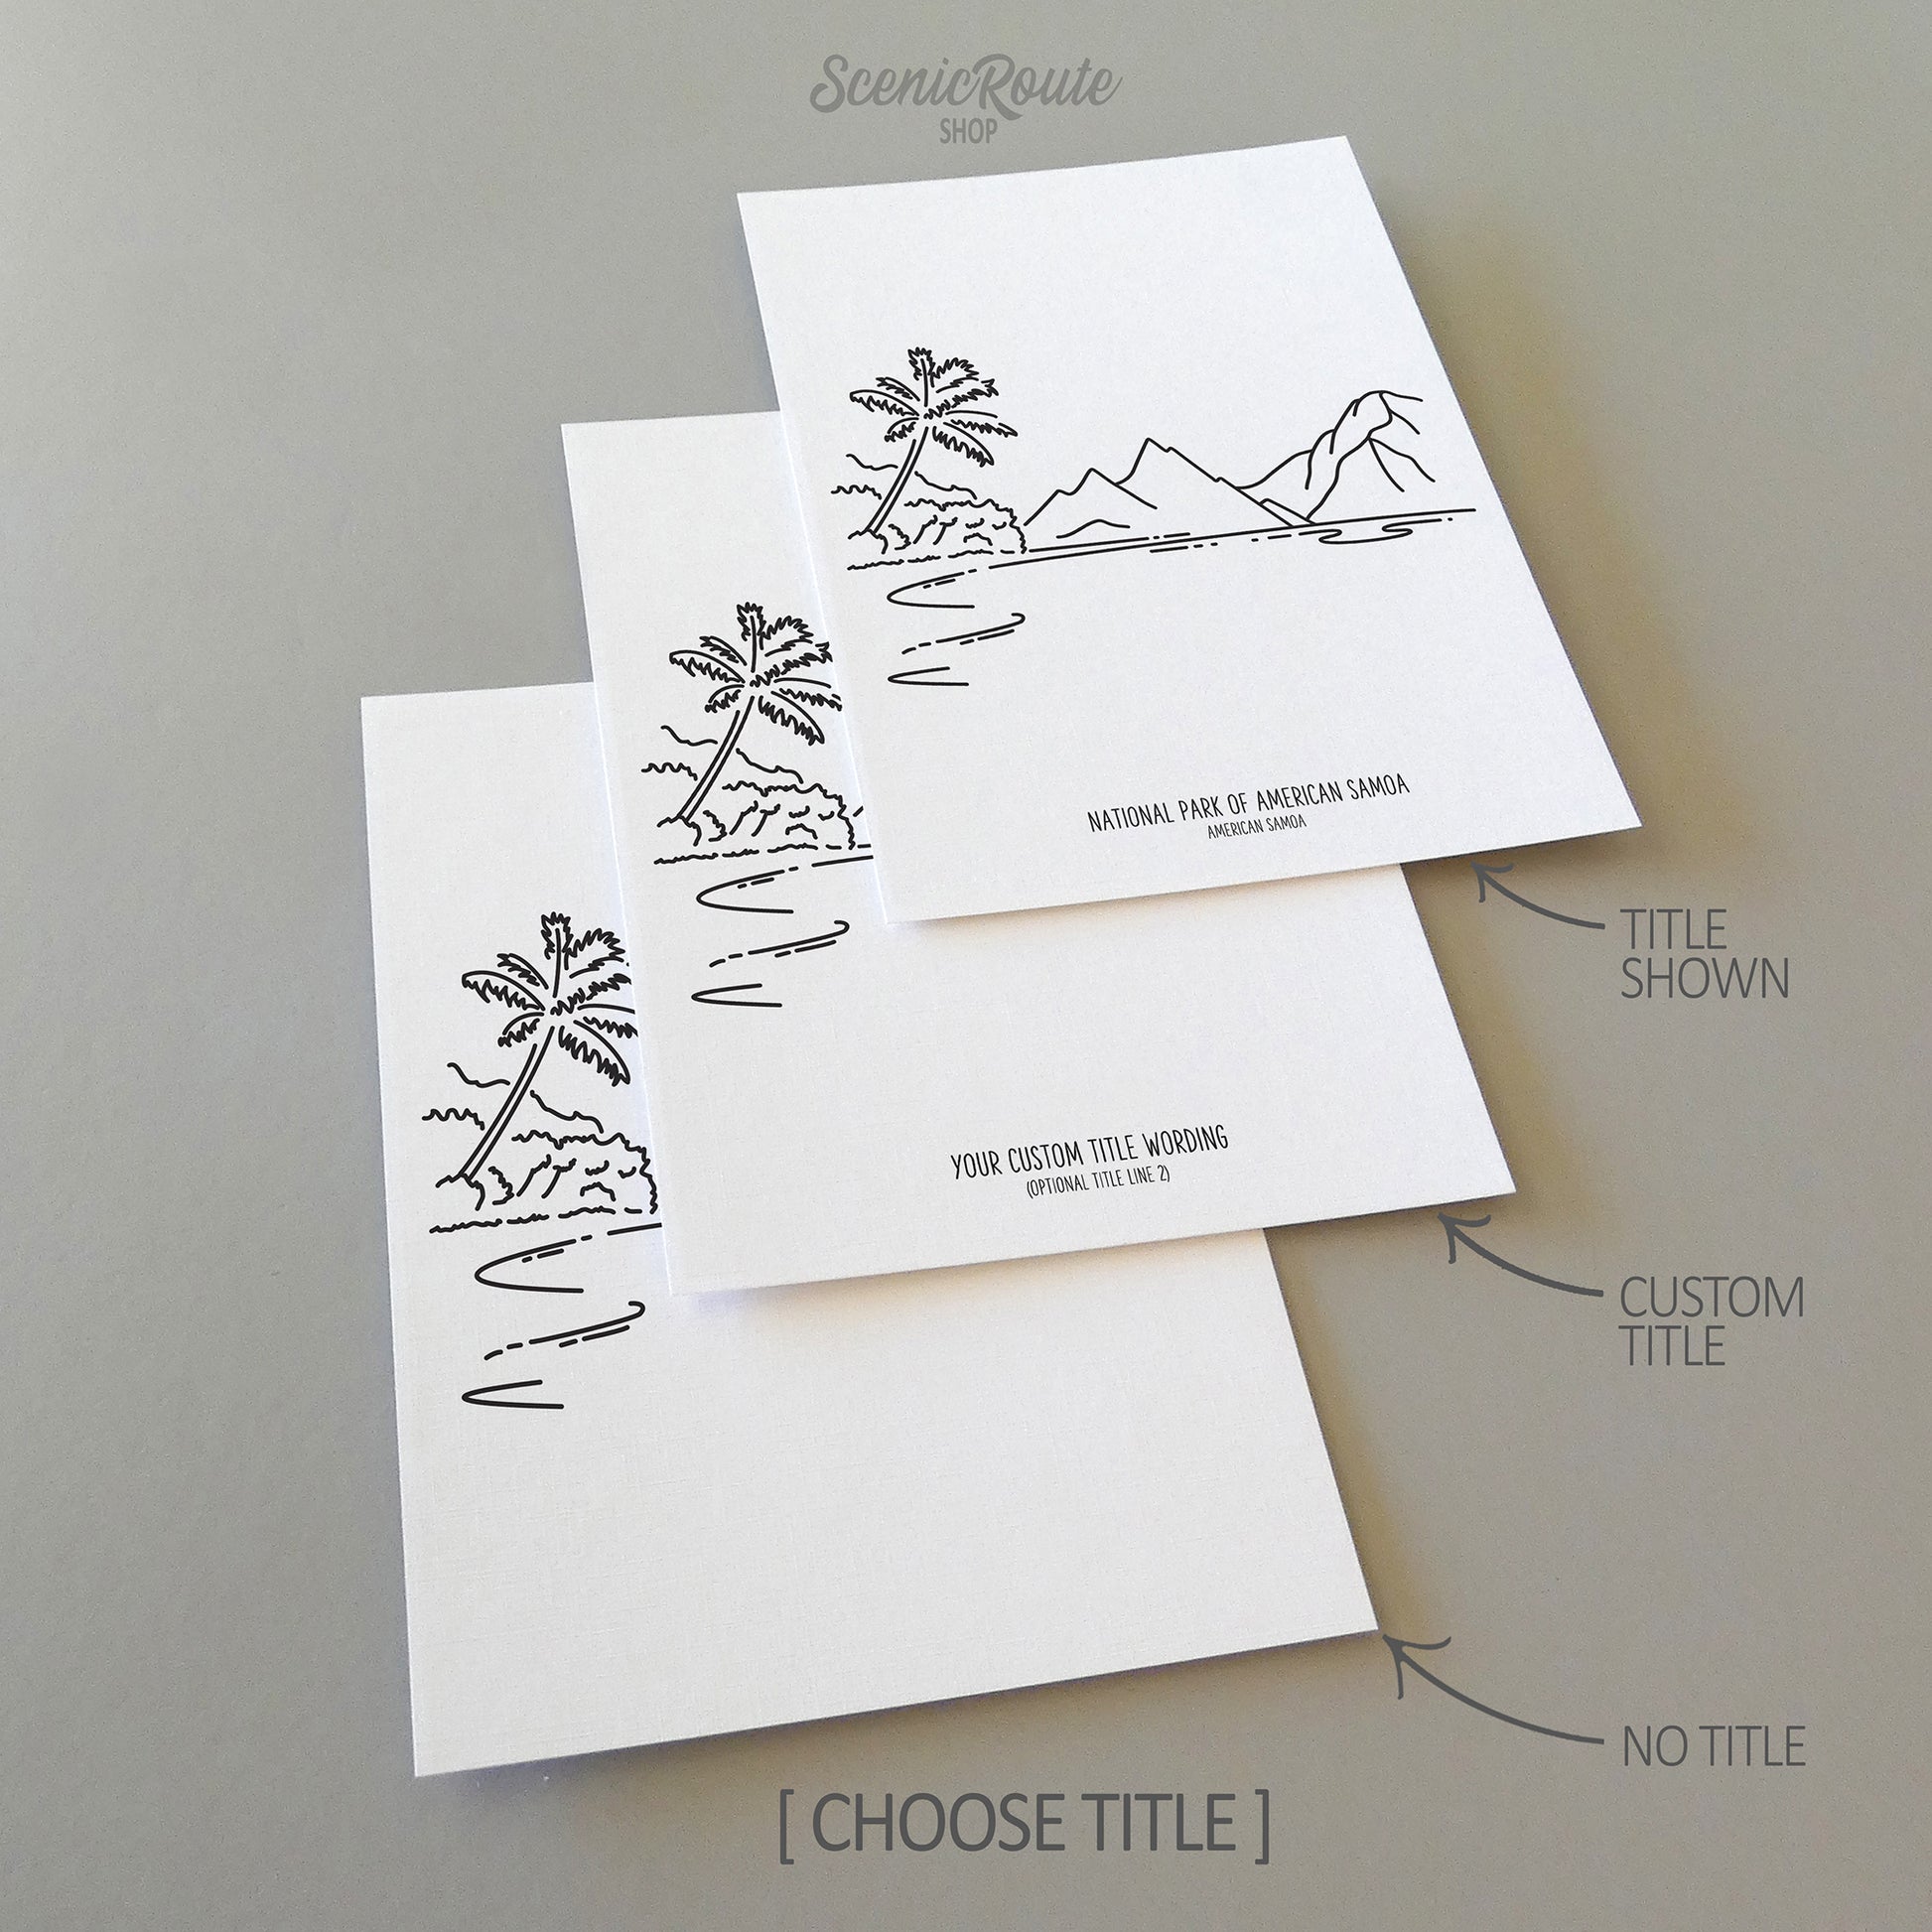 Three line art drawings of American Samoa National Park on white linen paper with a gray background. The pieces are shown with title options that can be chosen and personalized.